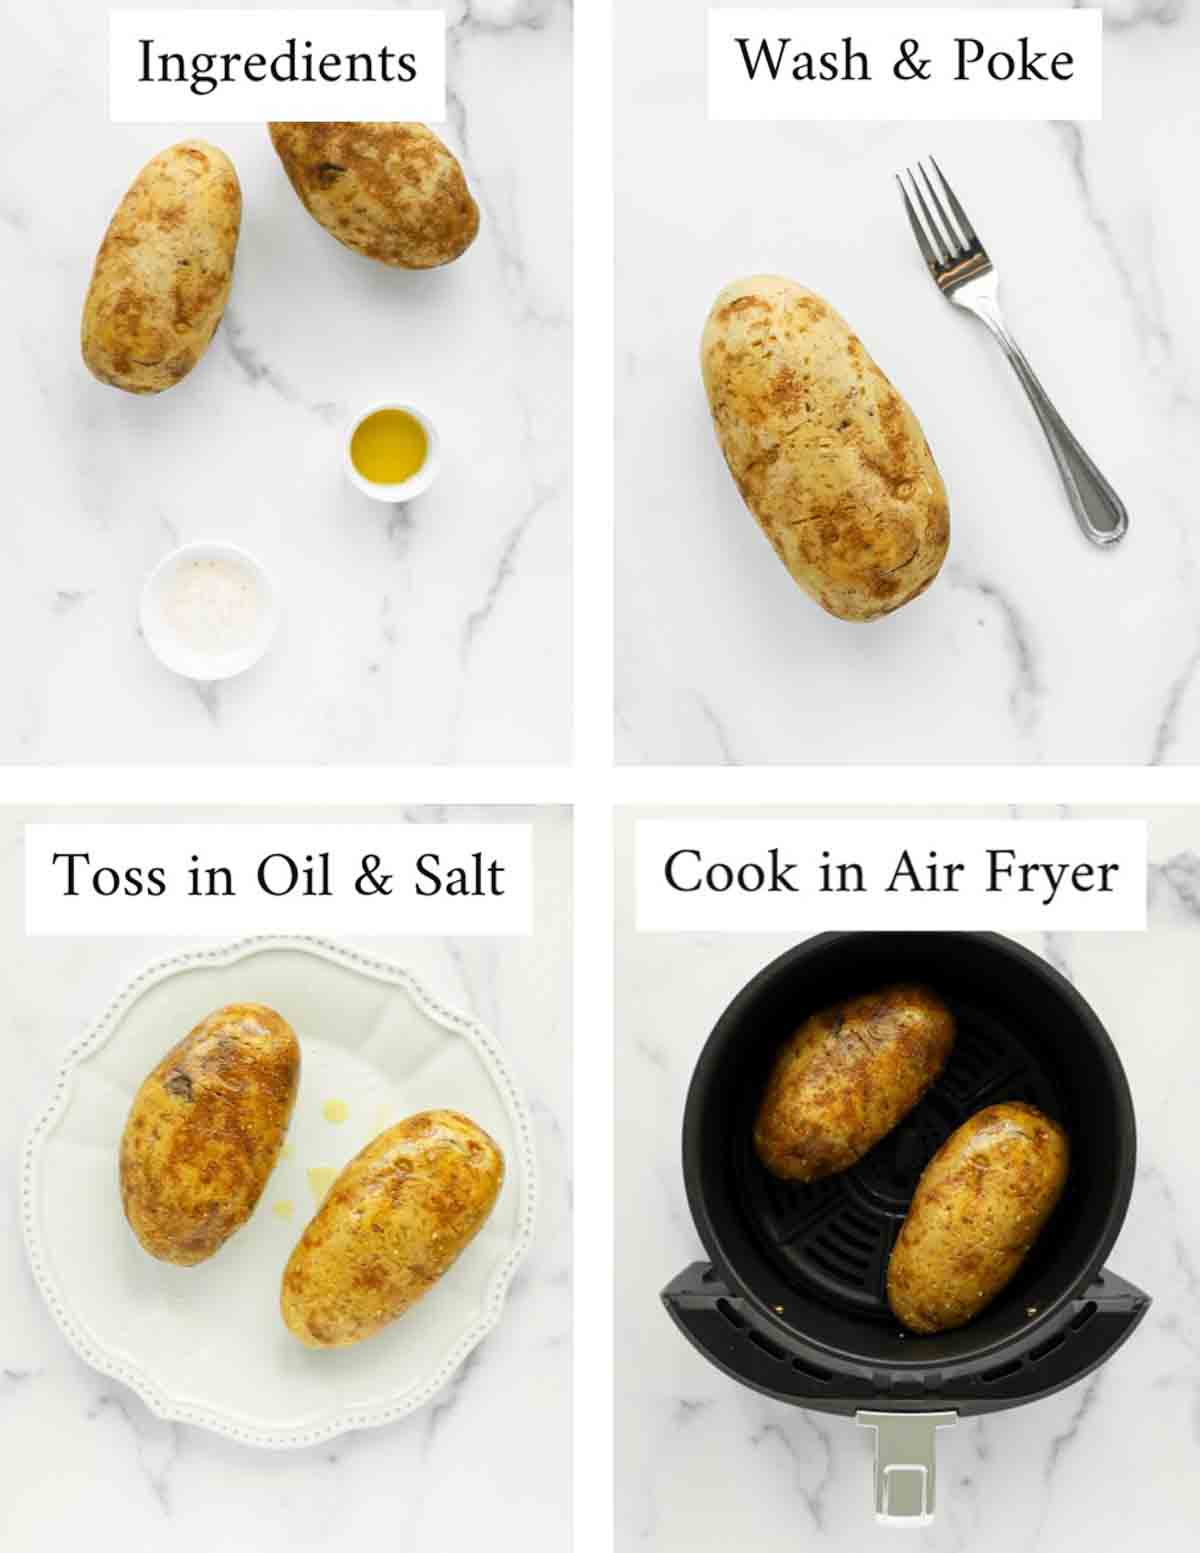 Four labeled images: 1. Ingredients with potatoes, olive oil, and salt. 2. "wash and poke", with a potato and a fork. 3. "toss in olive oil and salt", two potatoes in olive oil in salt on a white plate. 4. "cook in air fryer" two baked potatoes in an air fryer.